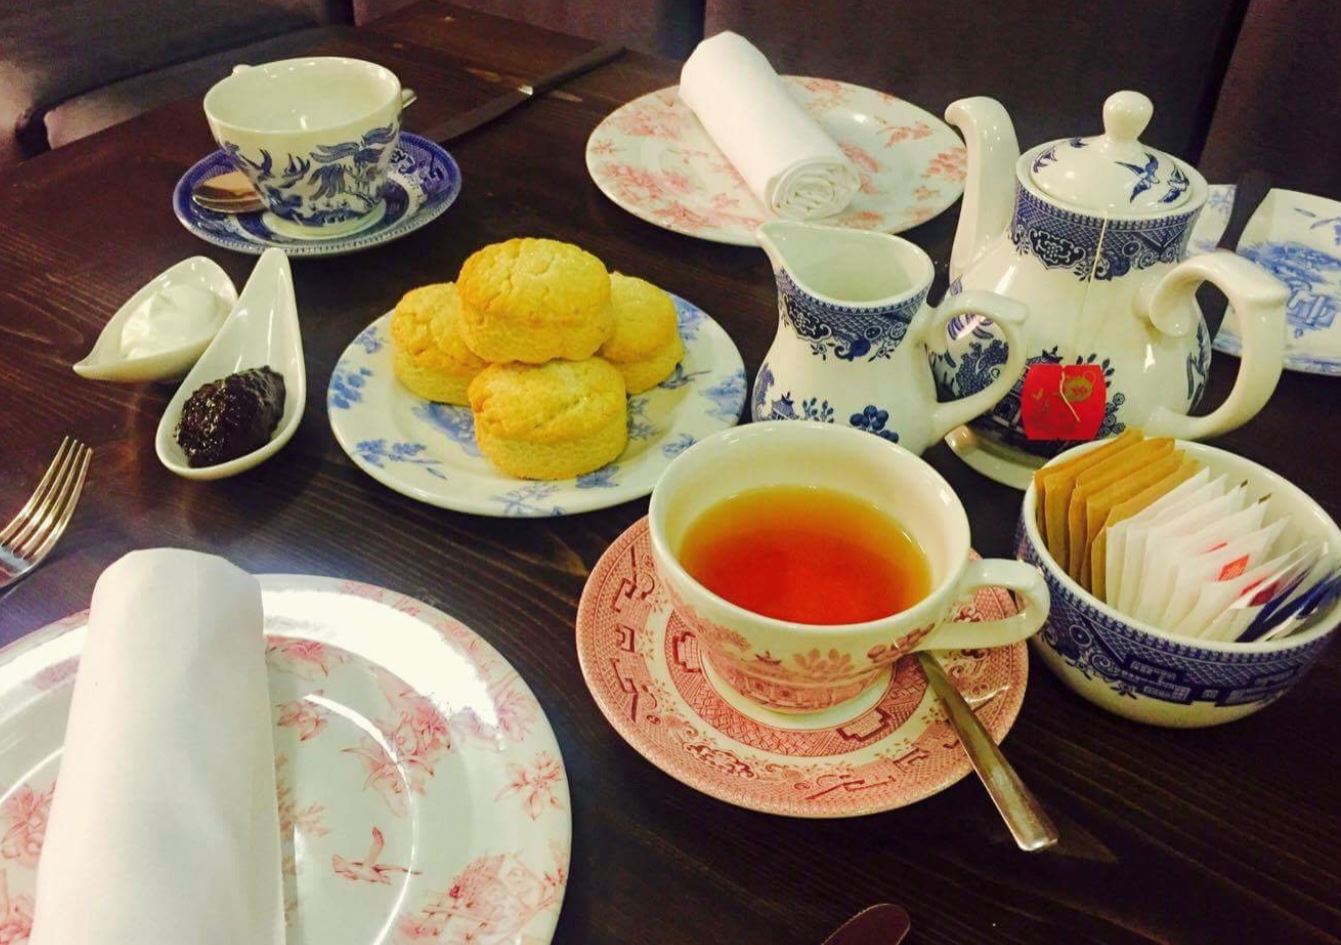 Townhouse Afternoon Tea